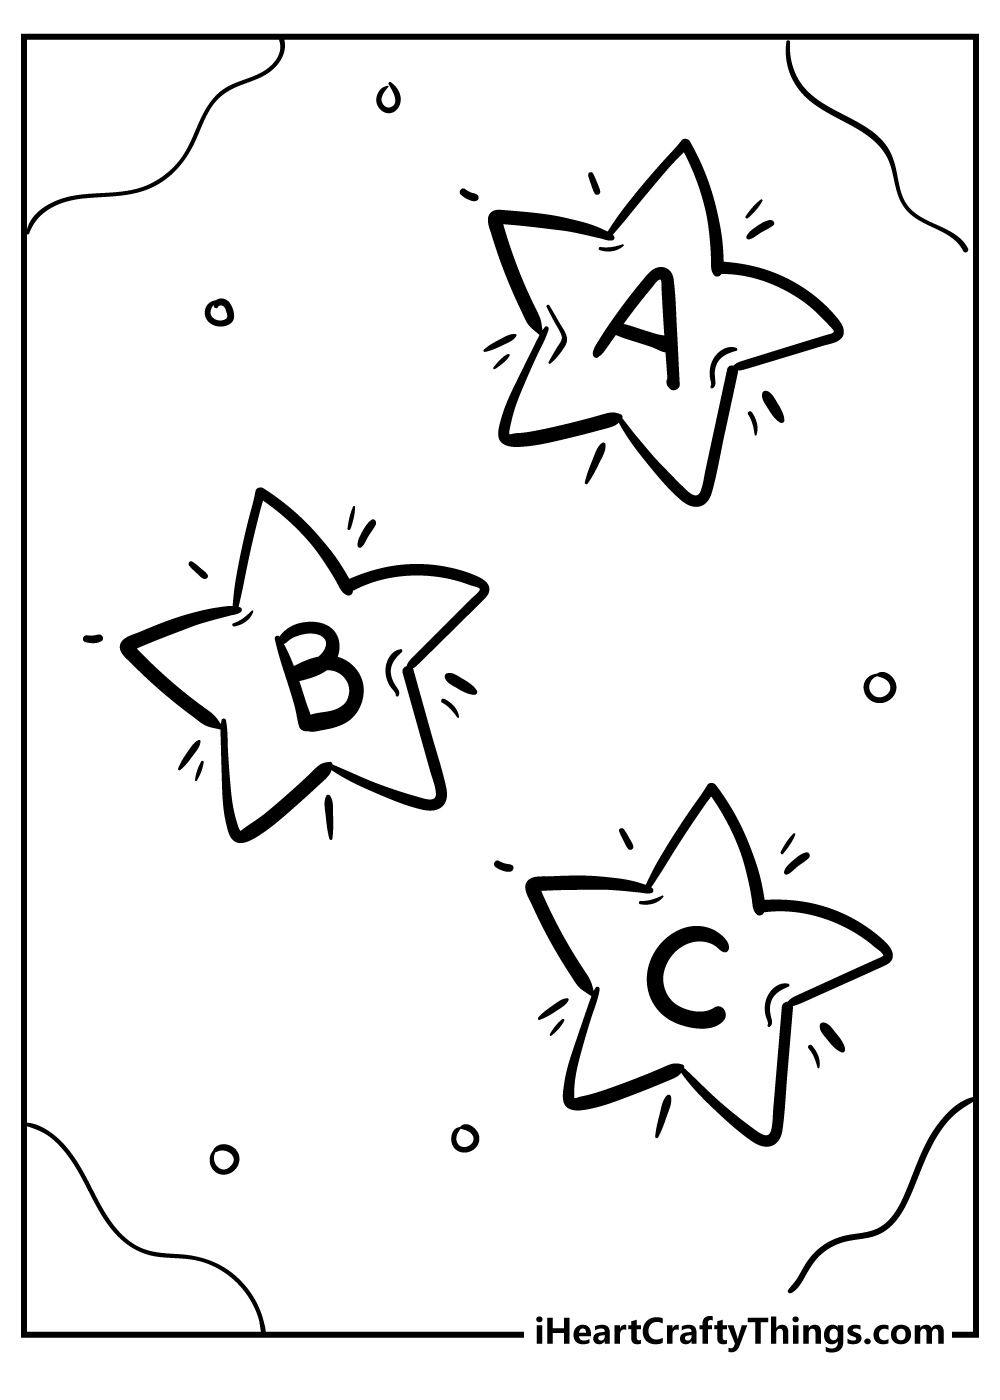 Toddlers Coloring Pages free printable